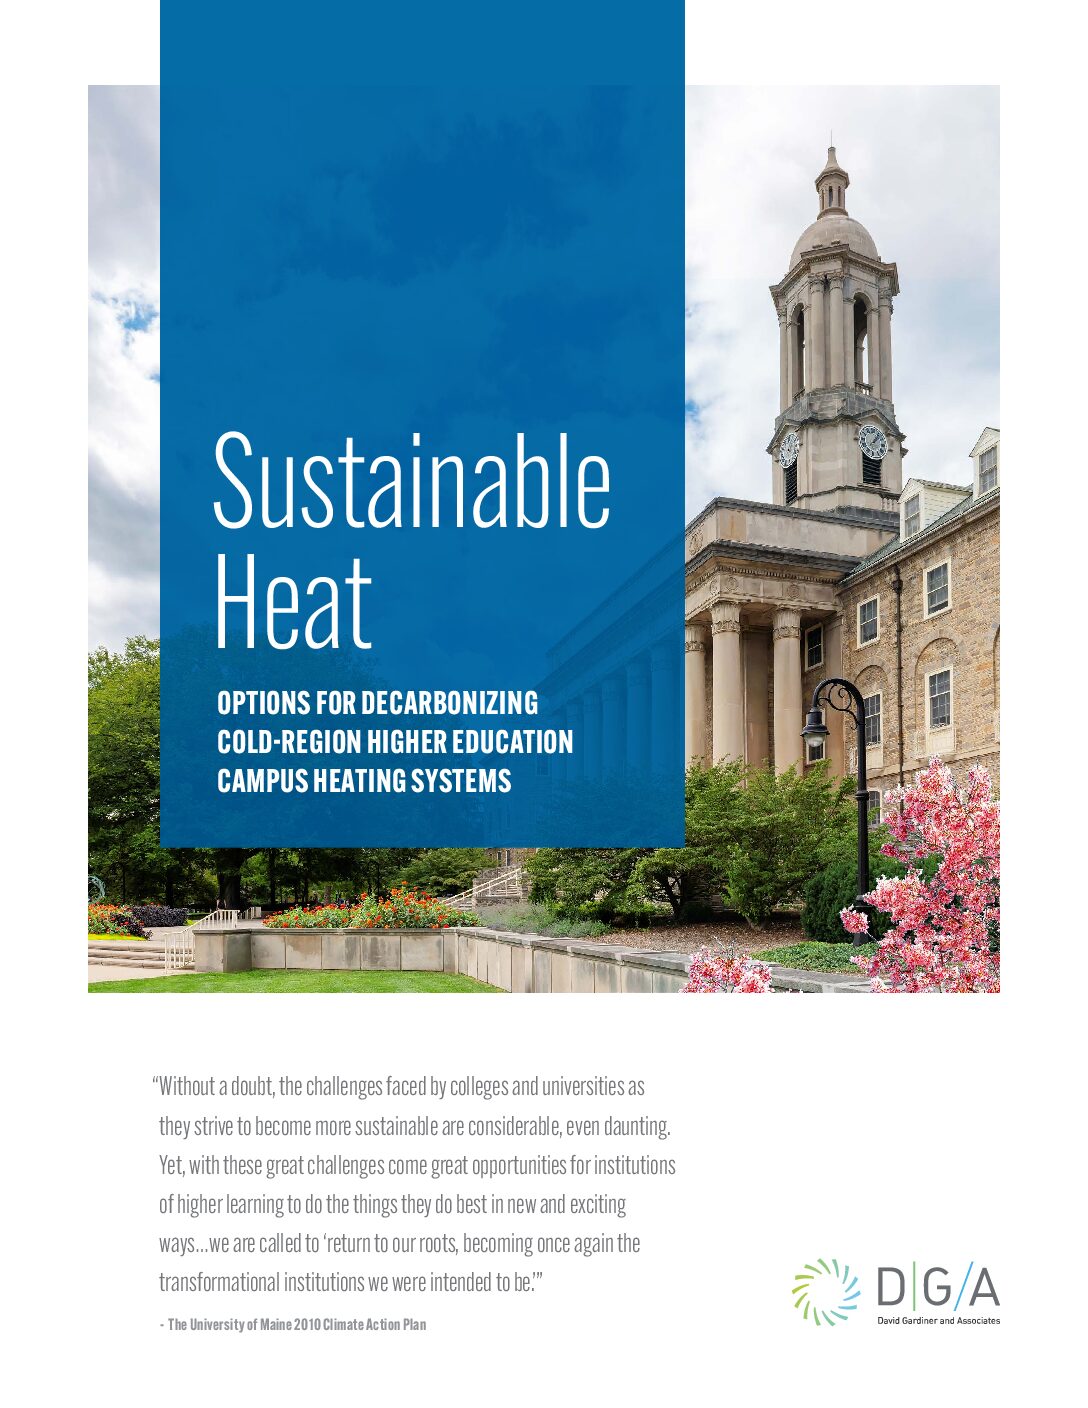 Sustainable Heat: Options for Decarbonizing Cold-Region Higher Education Campus Heating Systems